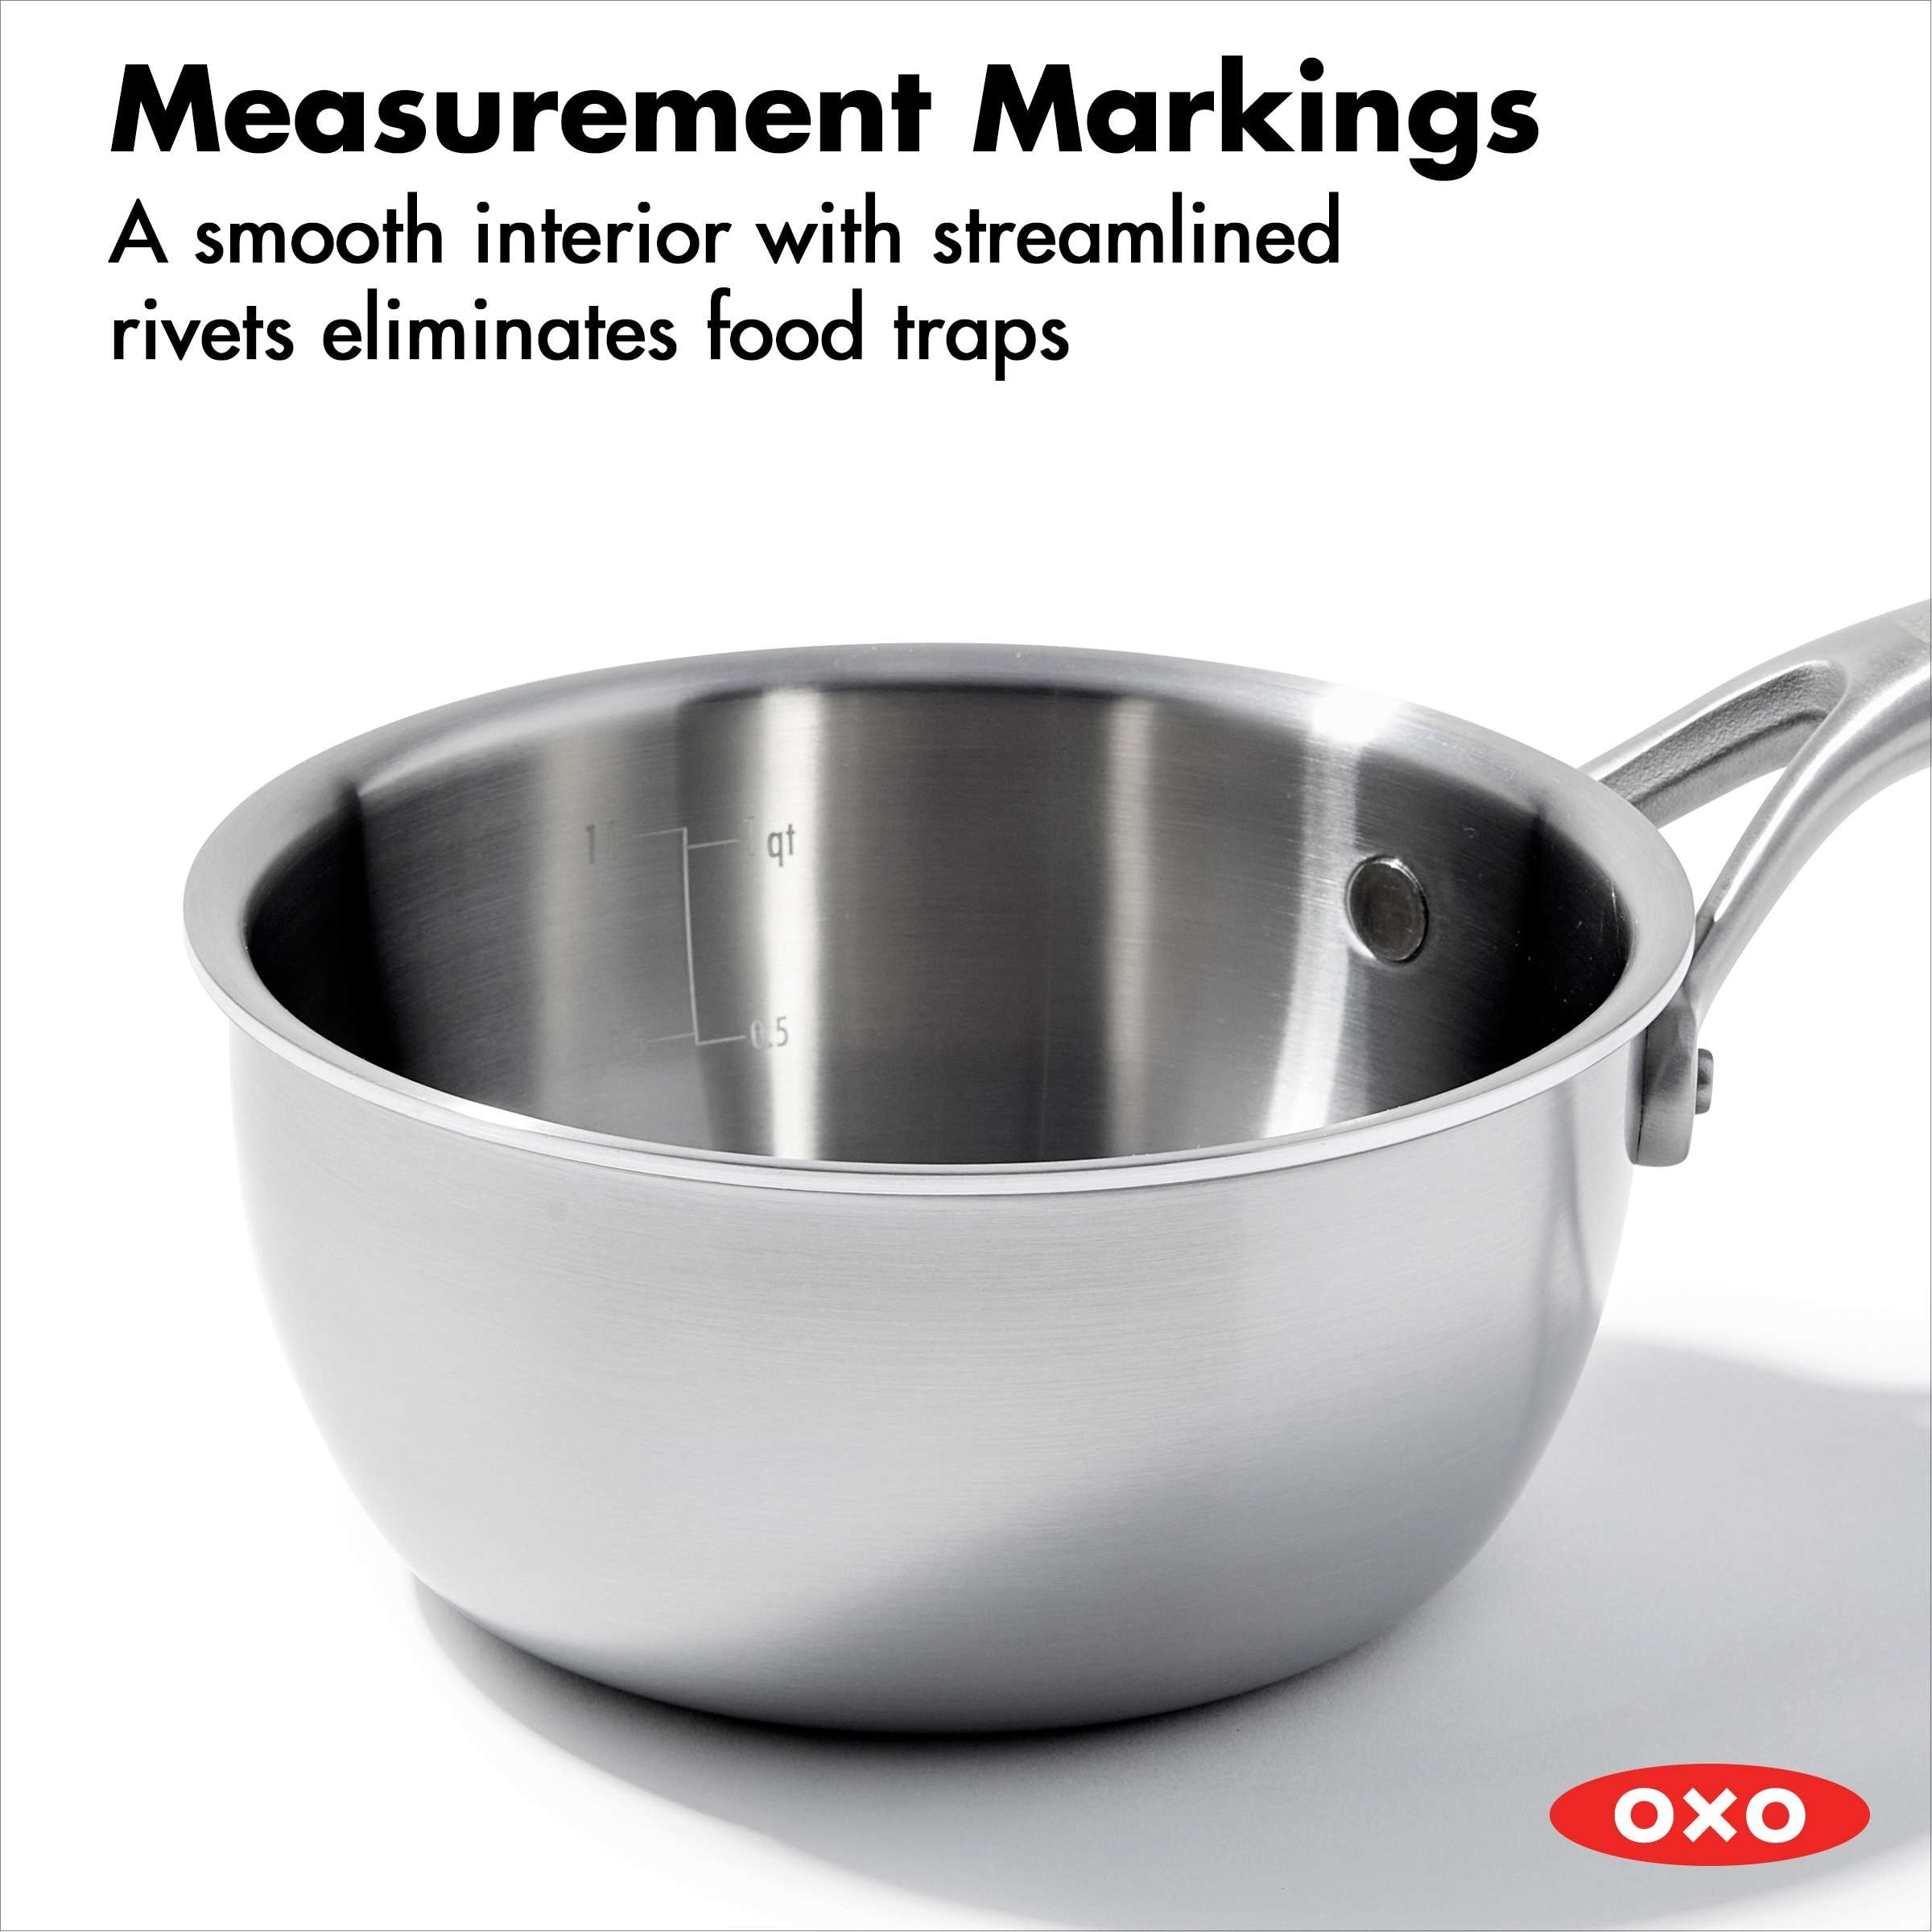 OXO Mira 3-Ply Stainless Steel 2-pc. Frying Pan Set